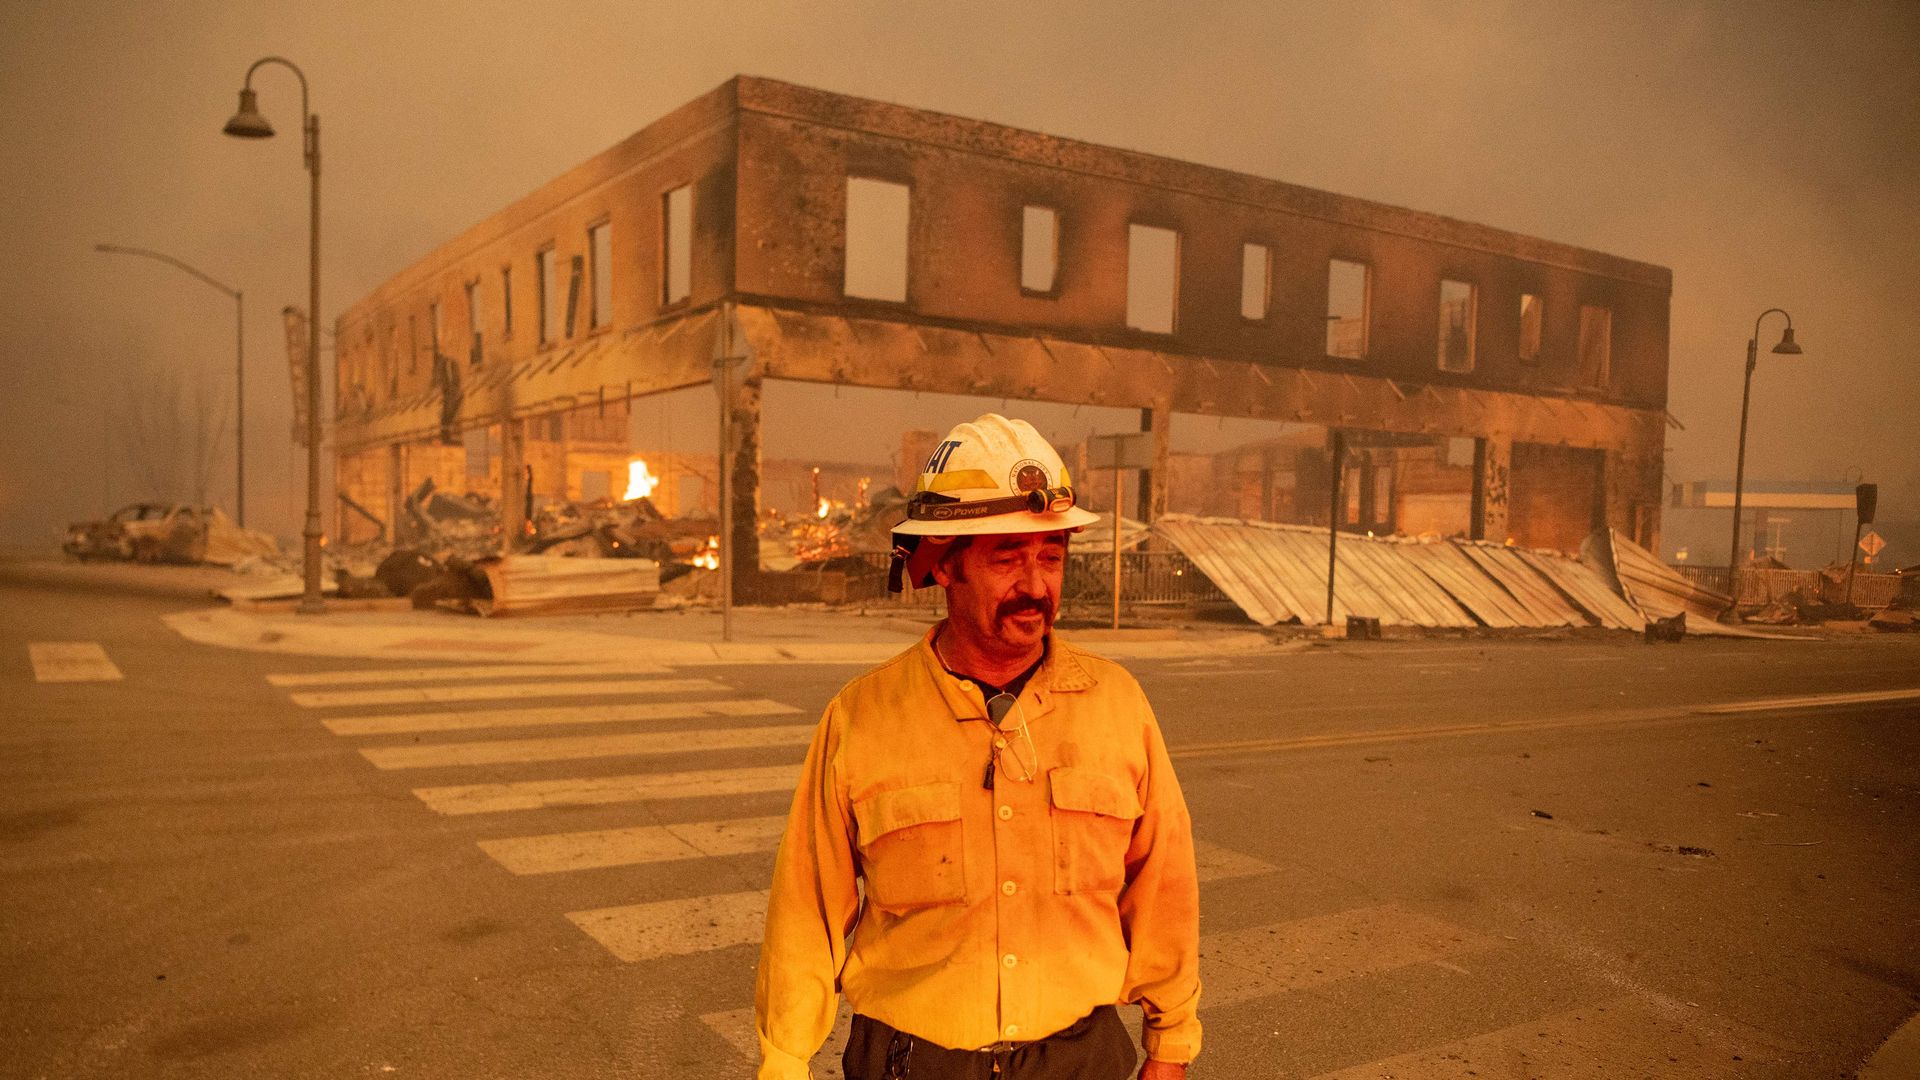 Firefighter standing in front of a burned out historic building.